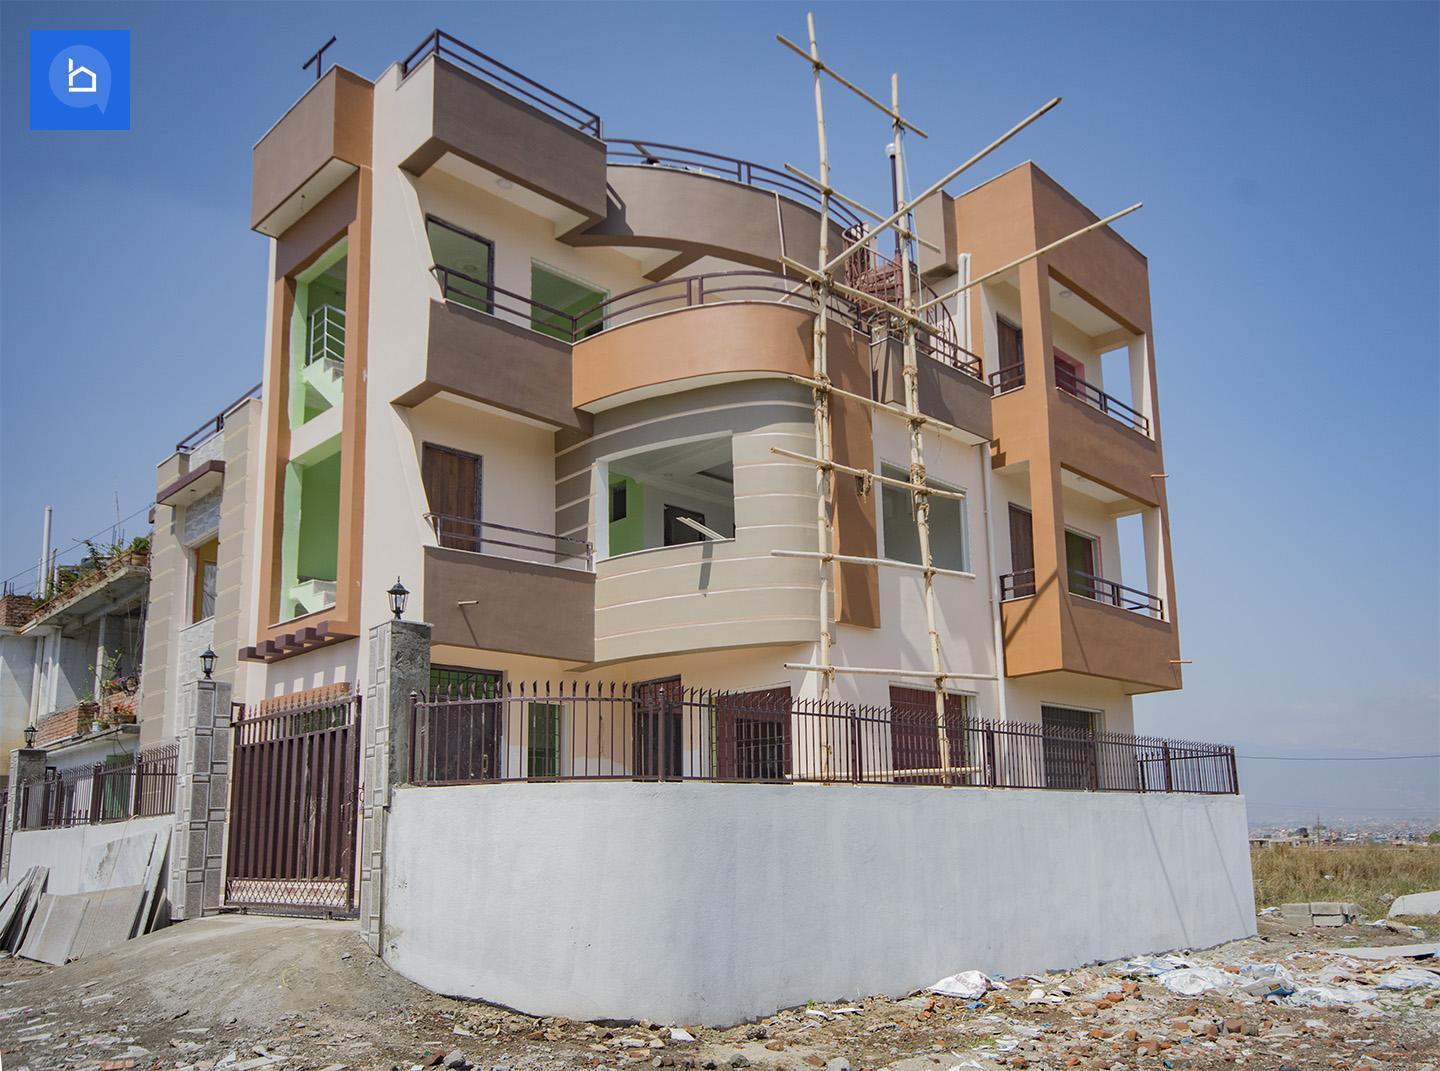 Photo of House for Sale in Imadol, Lalitpur